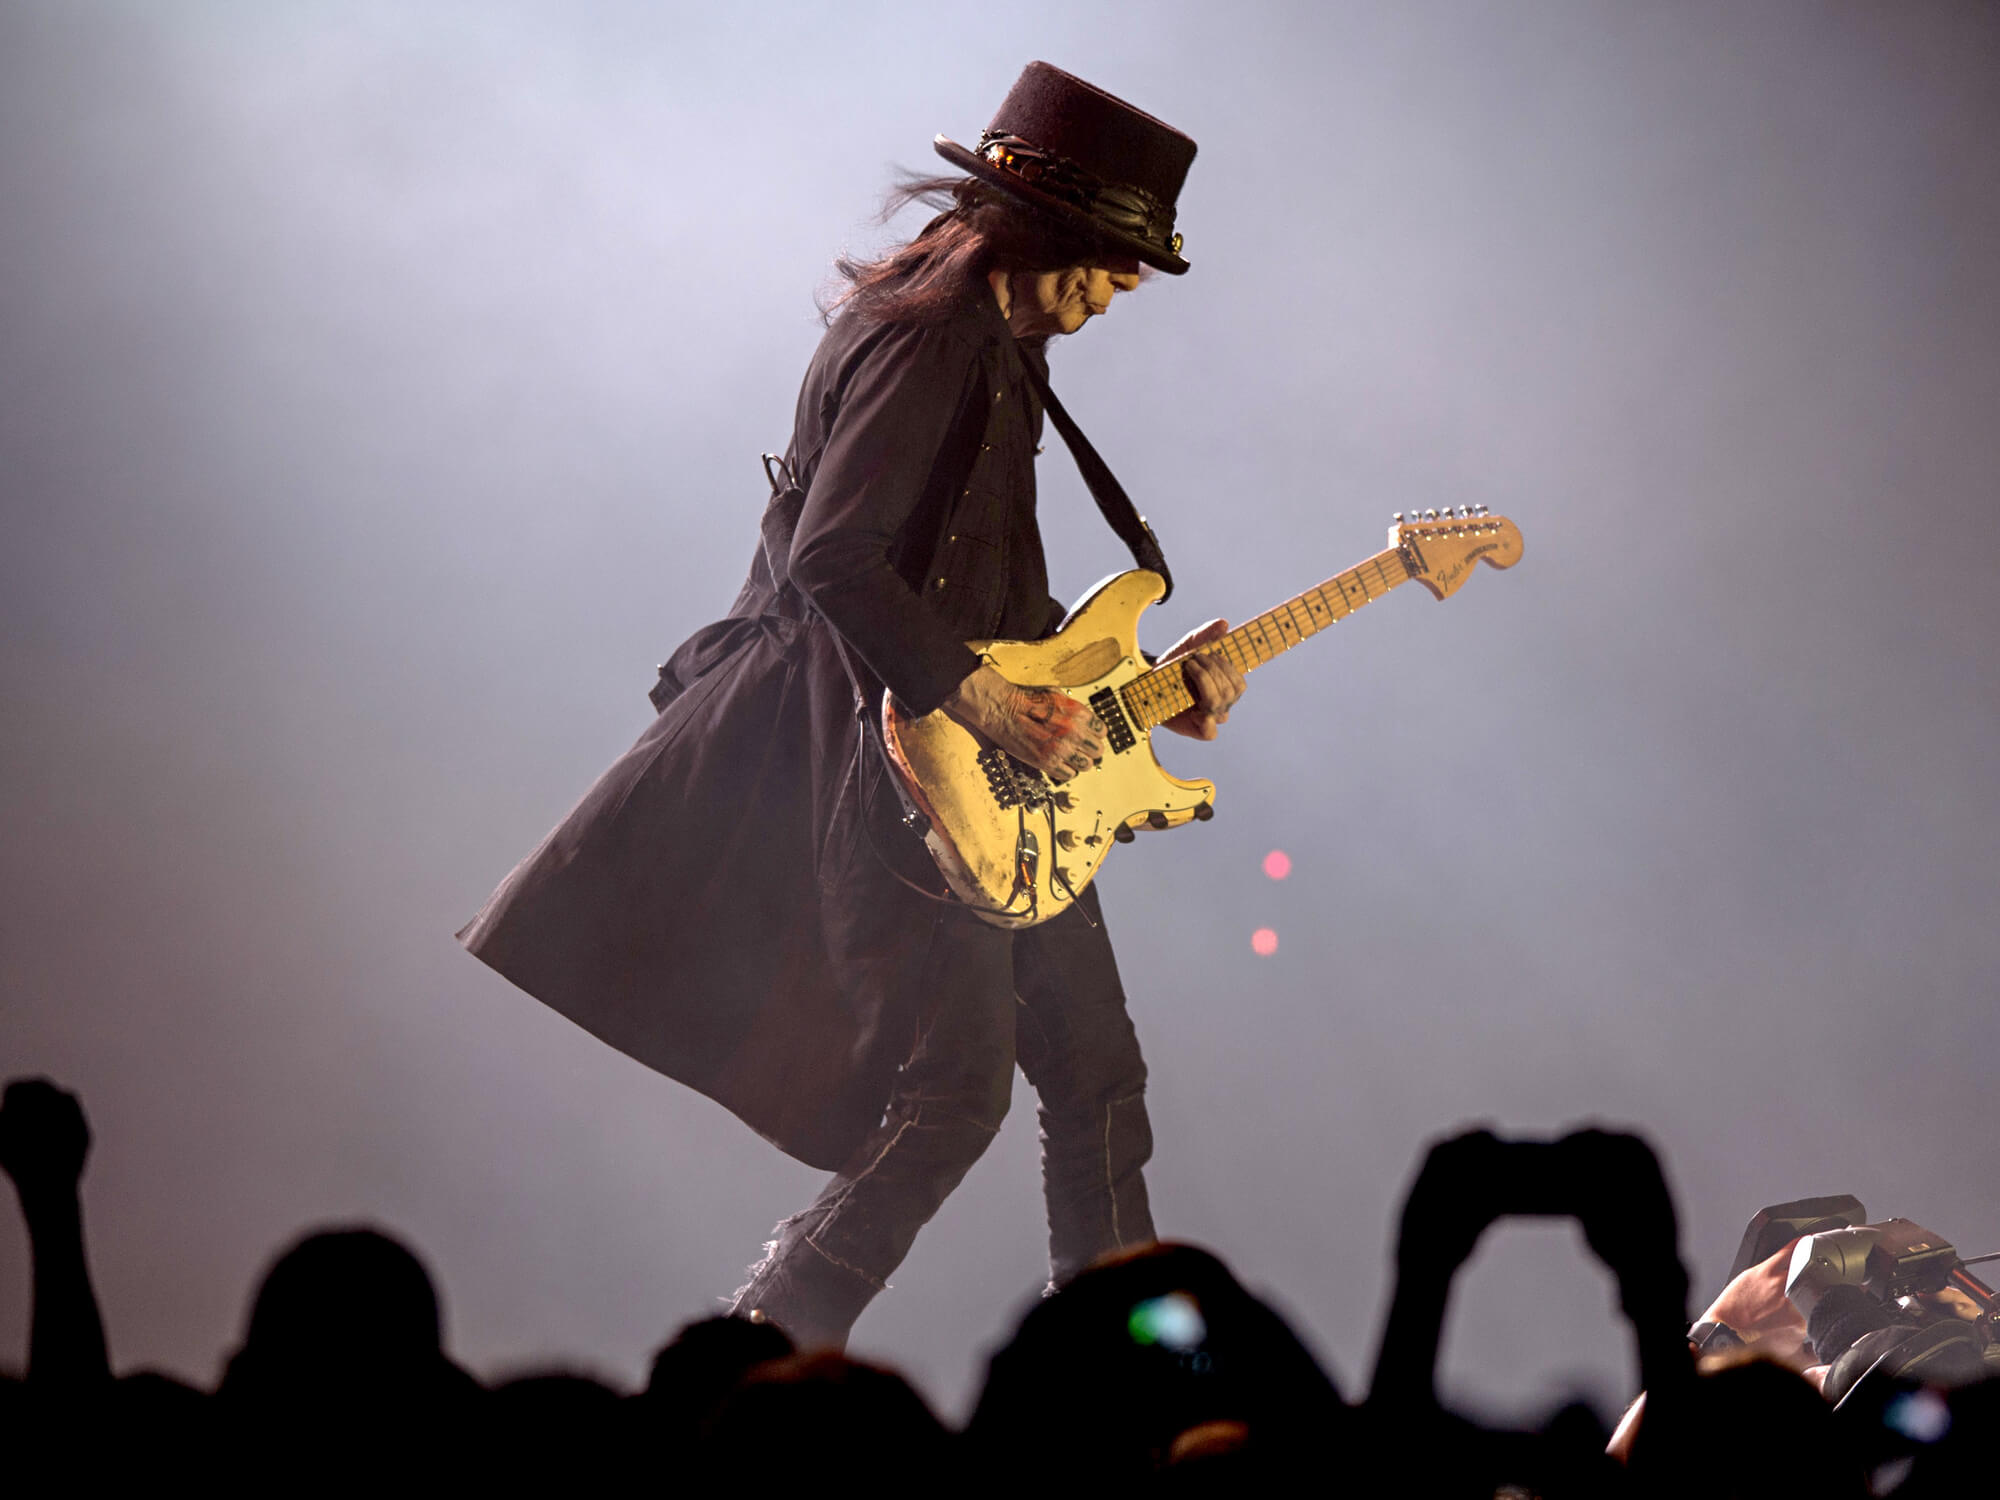 Mick Mars of the band Motley Crue performs